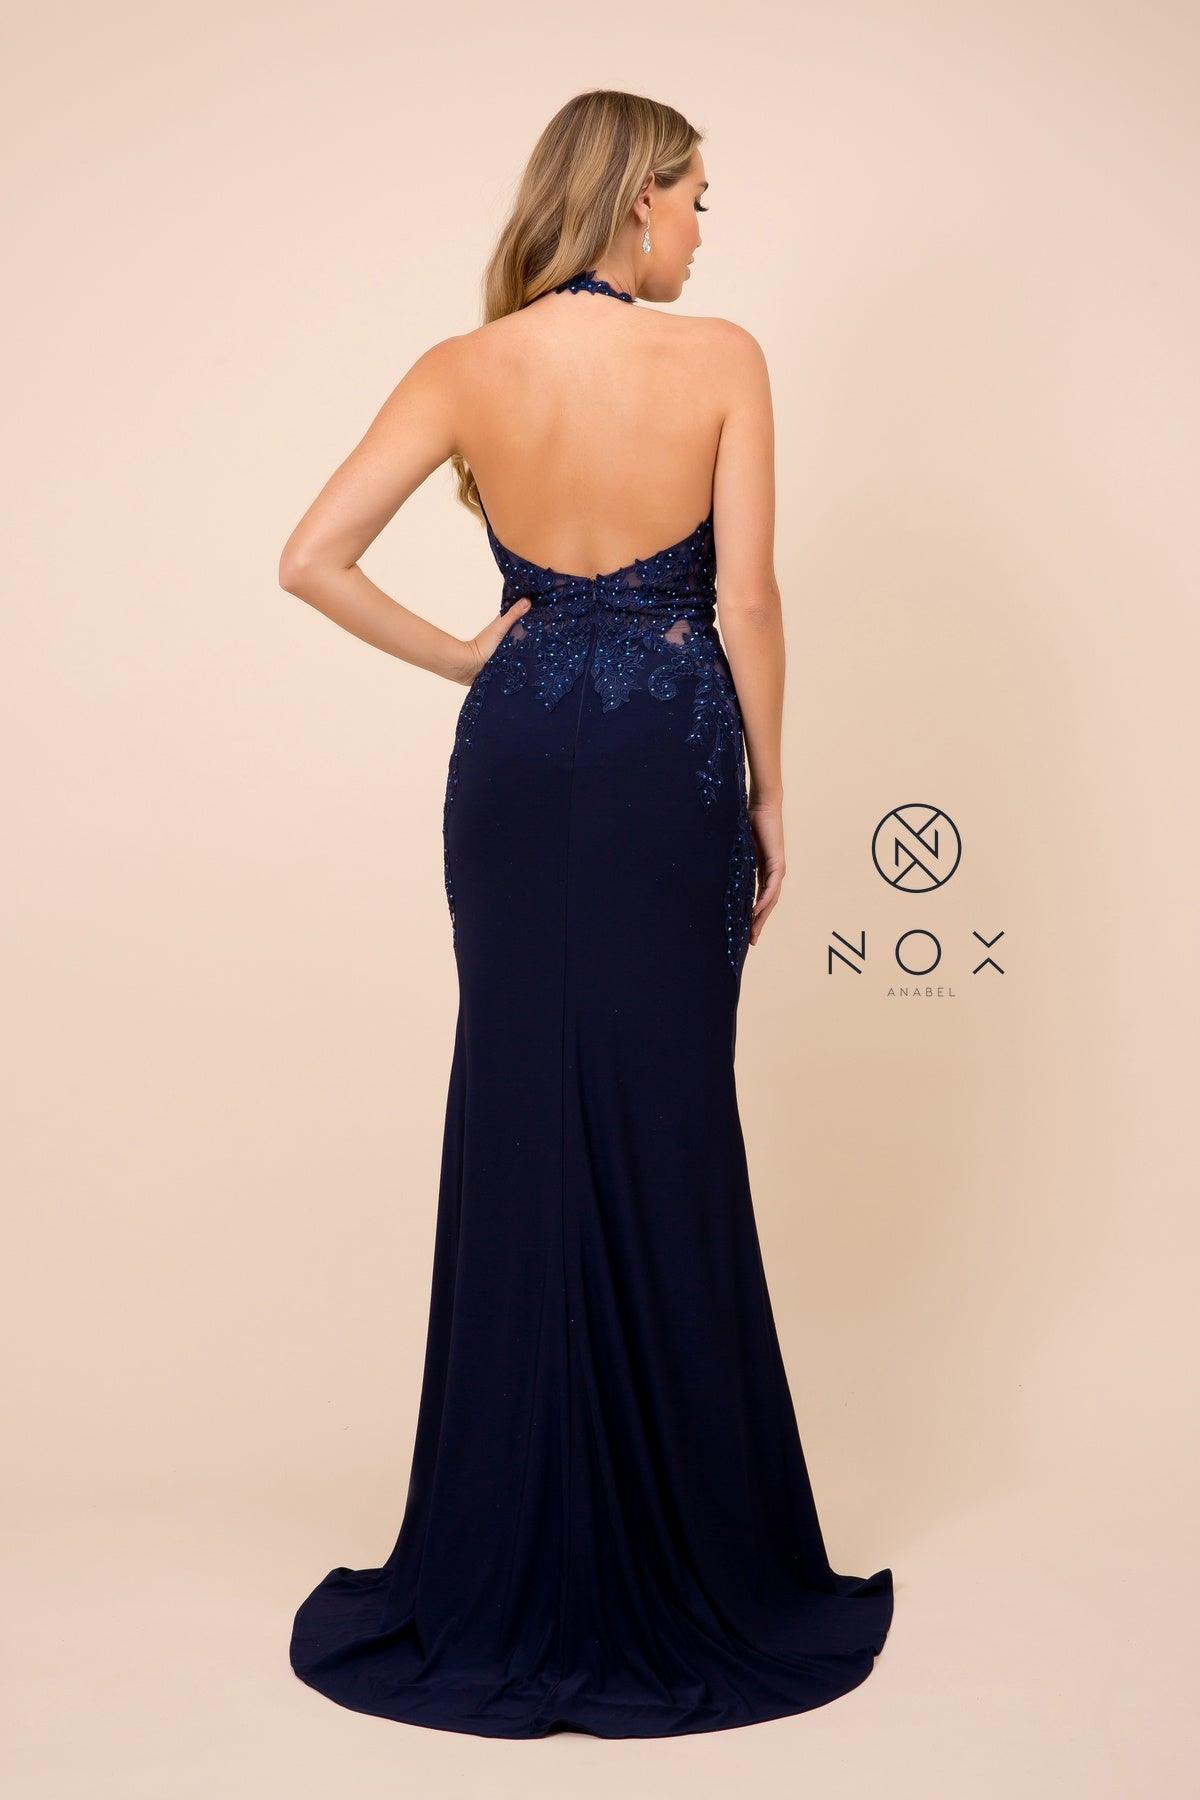 Long Prom Dress Evening Gown Navy - The Dress Outlet Nox Anabel